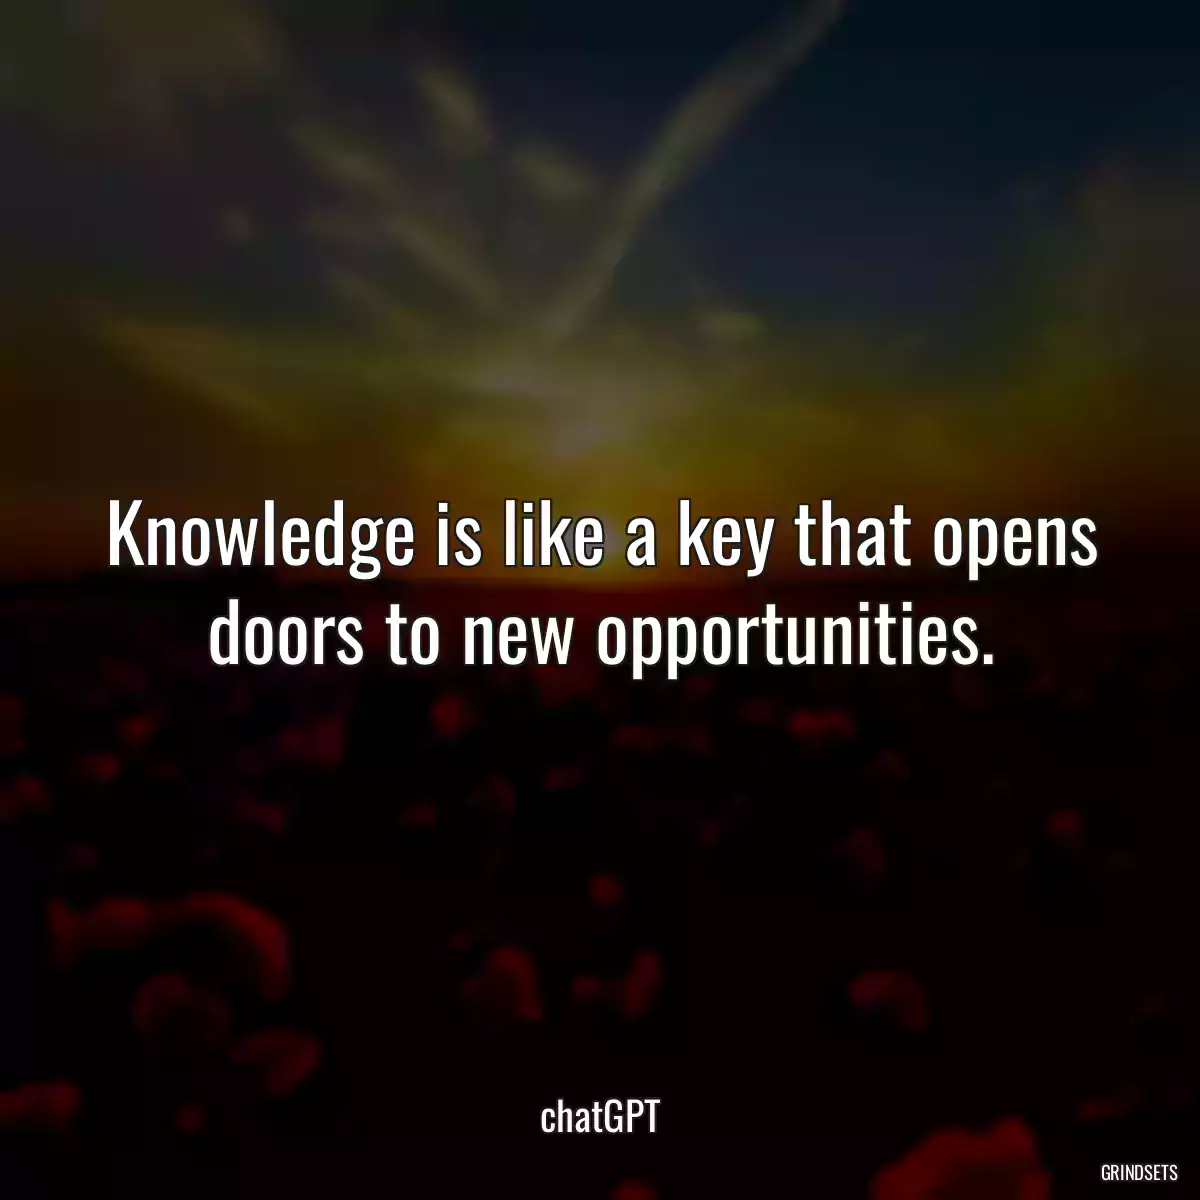 Knowledge is like a key that opens doors to new opportunities.